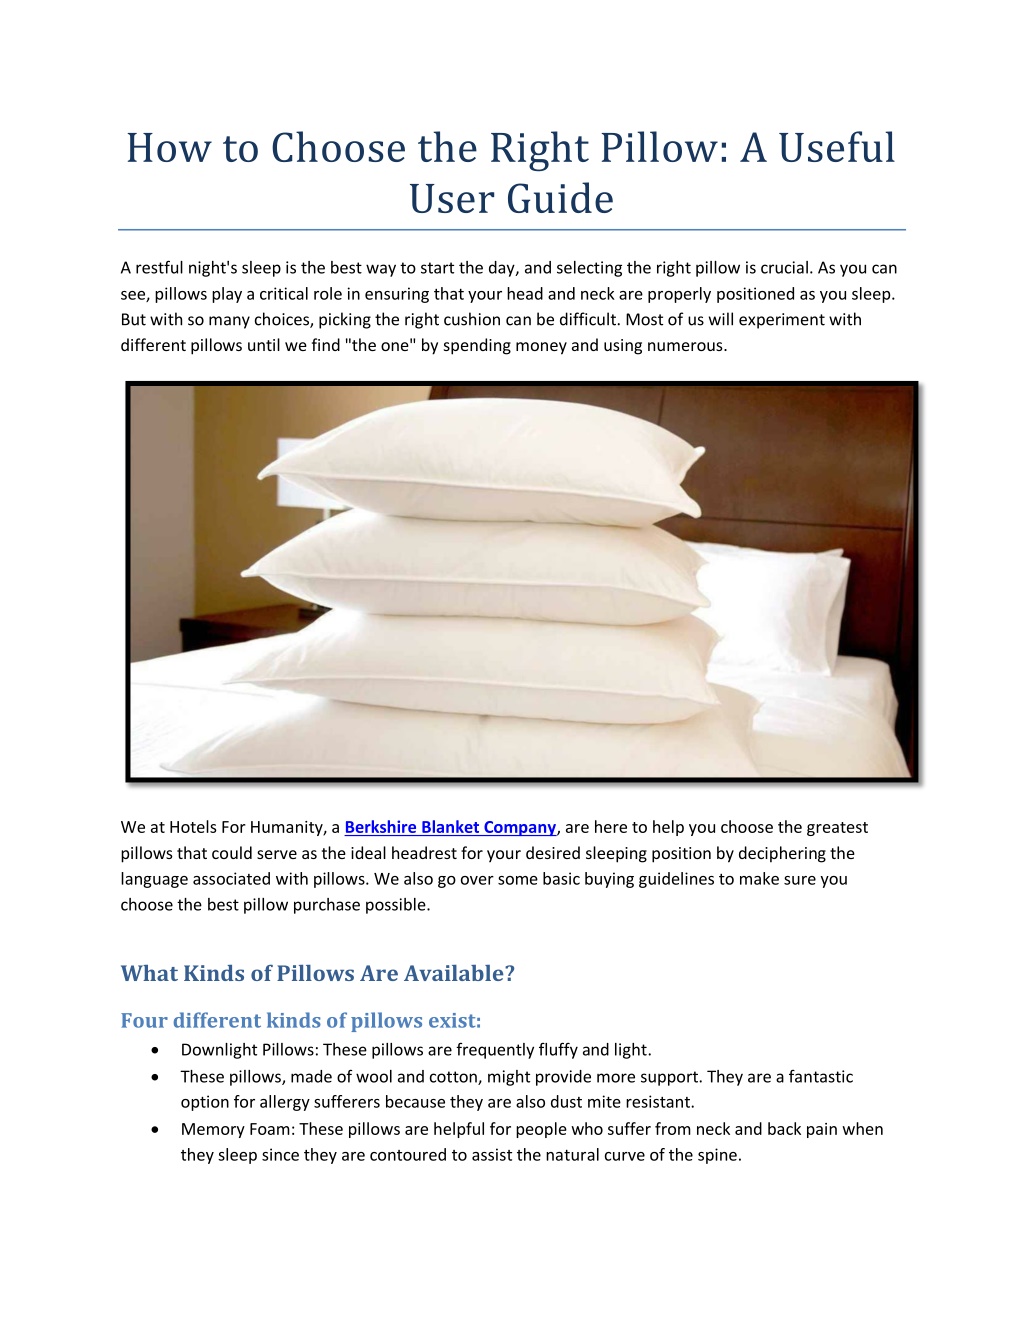 Ppt How To Choose The Right Pillow A Useful User Guide Hotel4humanity Powerpoint 